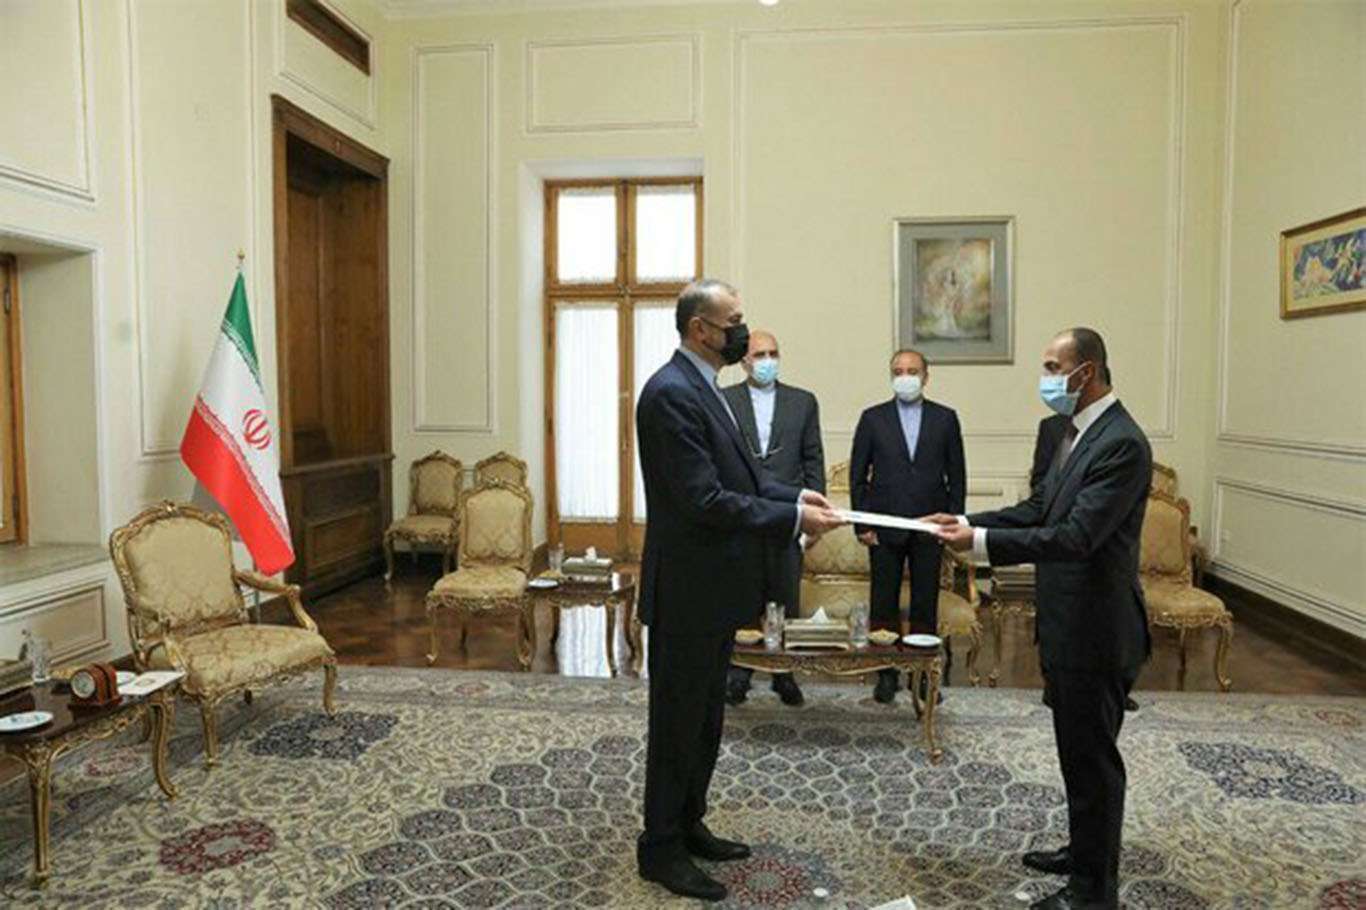 Kuwait's new ambassador meets with Iranian FM, submits credentials